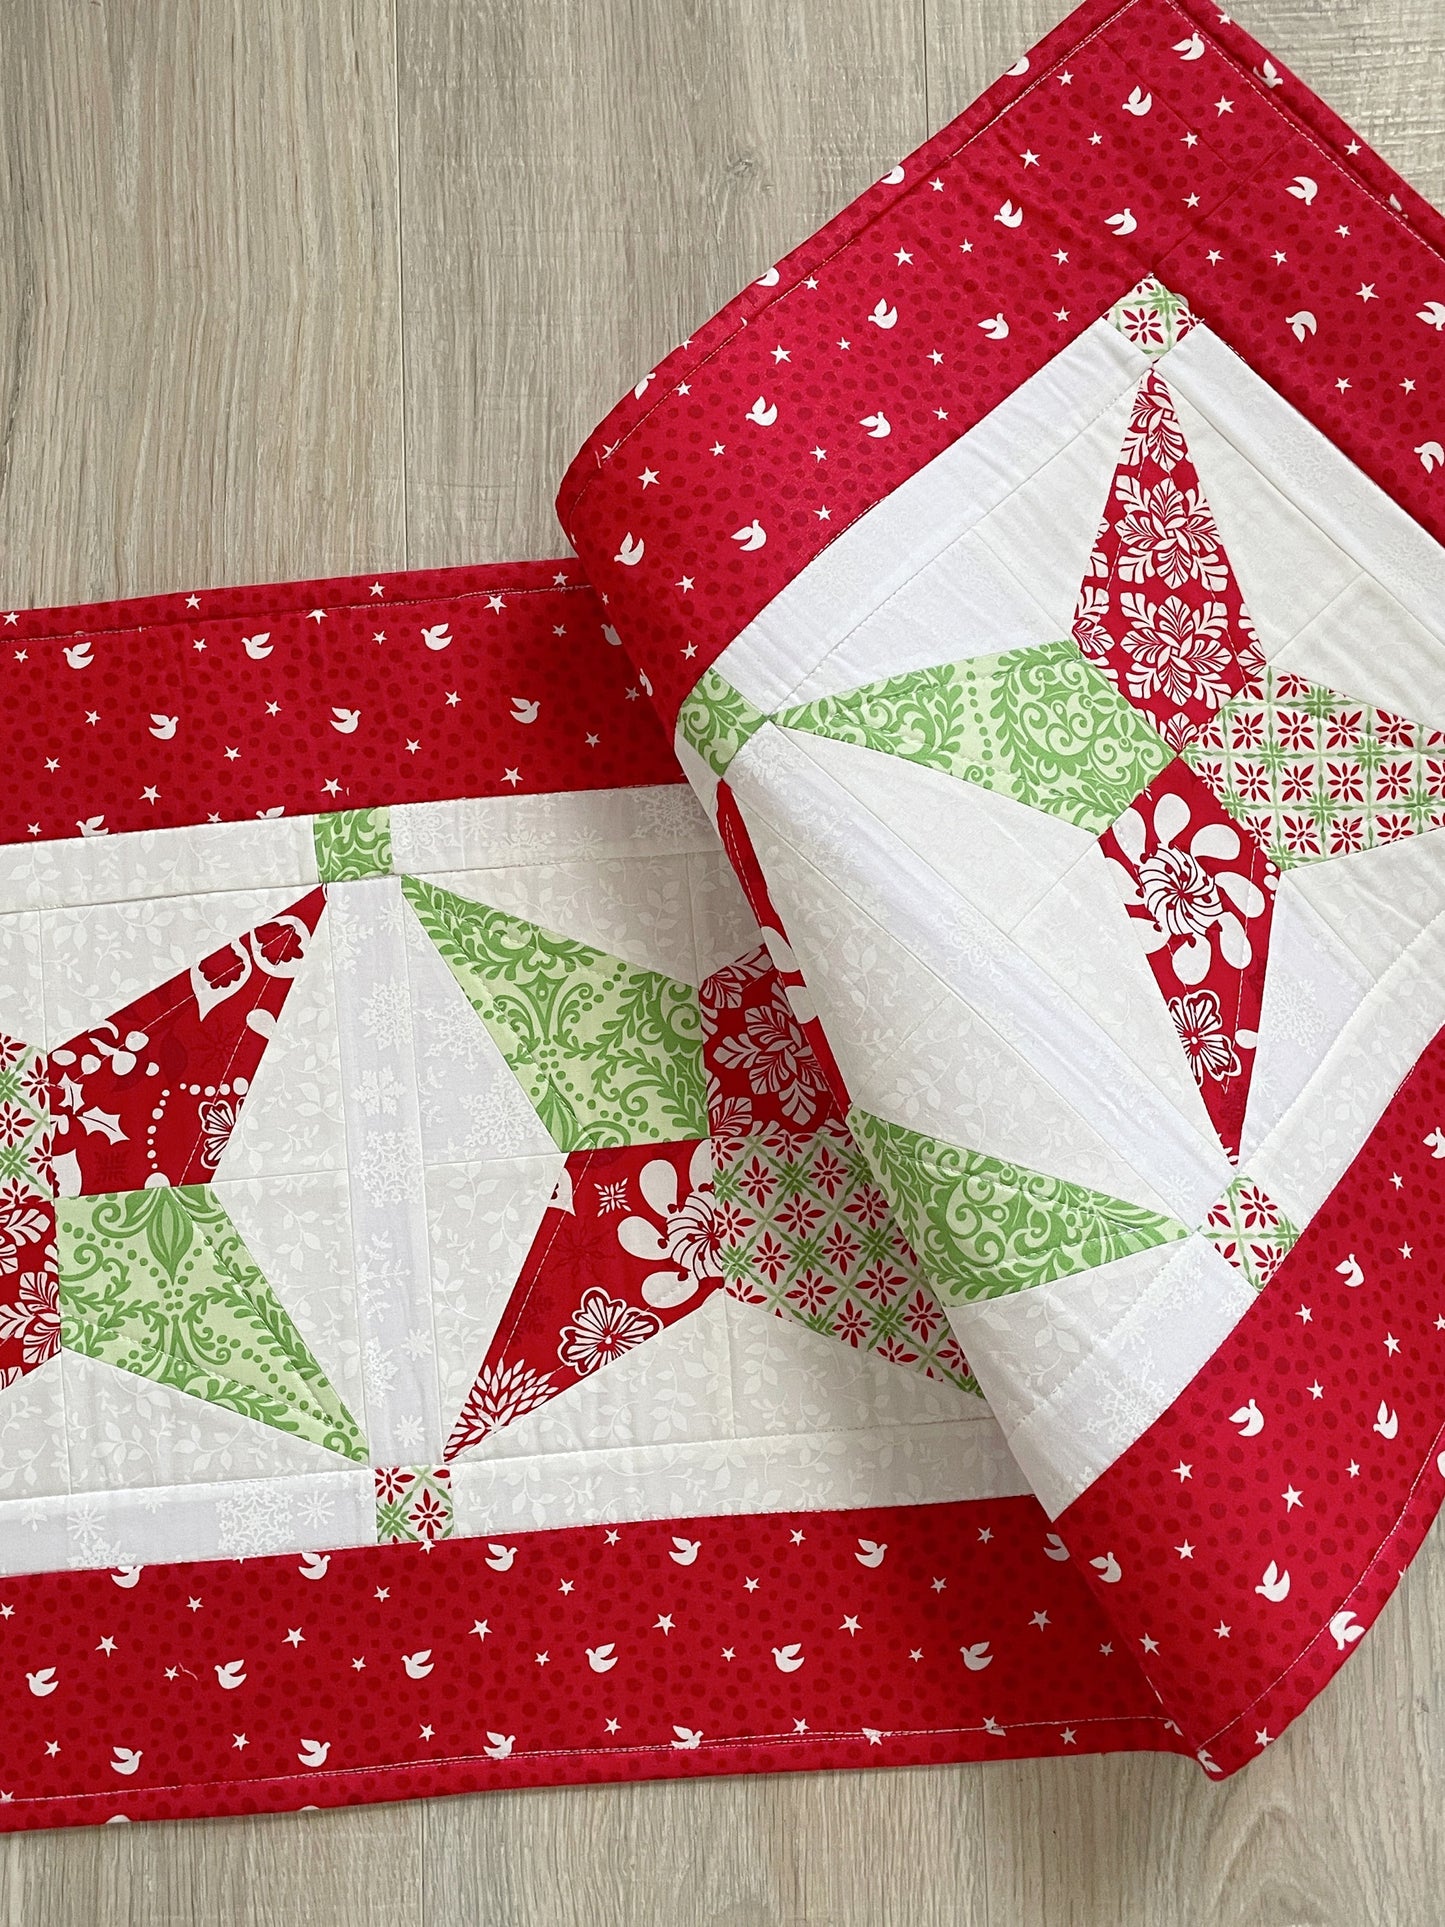 Quilted Christmas Star Table Runner, Contemporary Home Decor